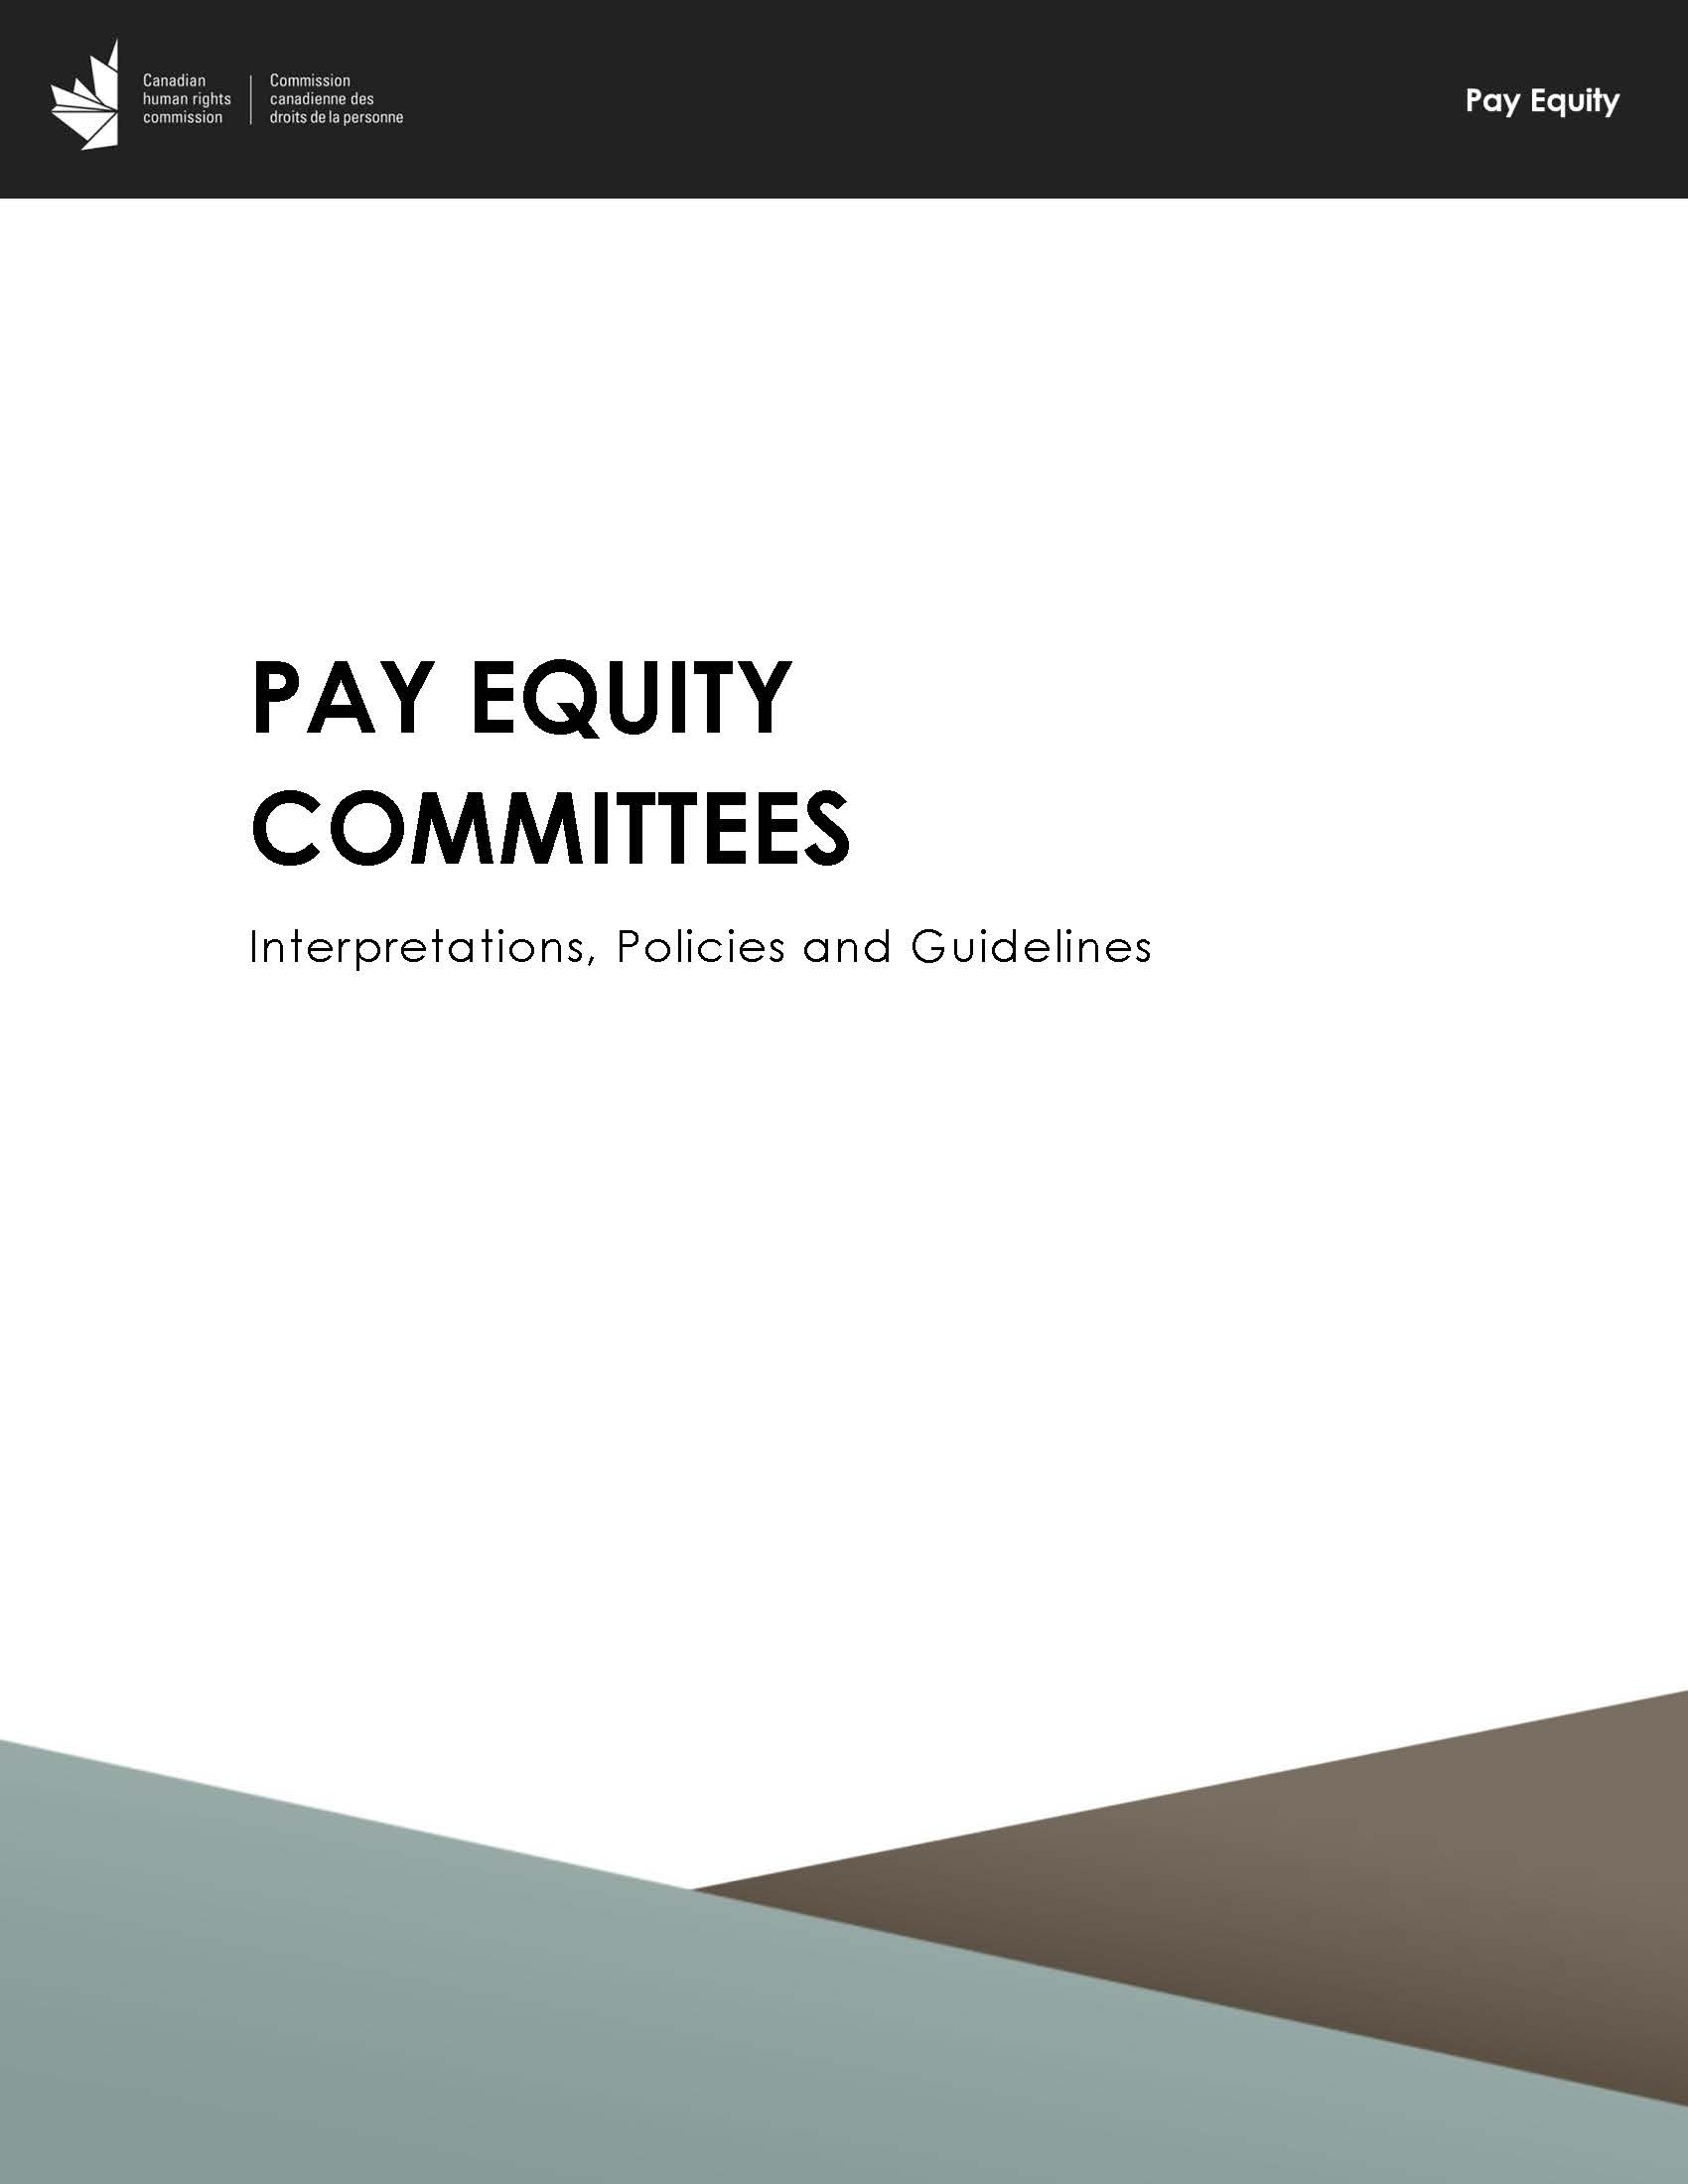 Pay Equity Committees - Interpretations, Policies and Guidelines